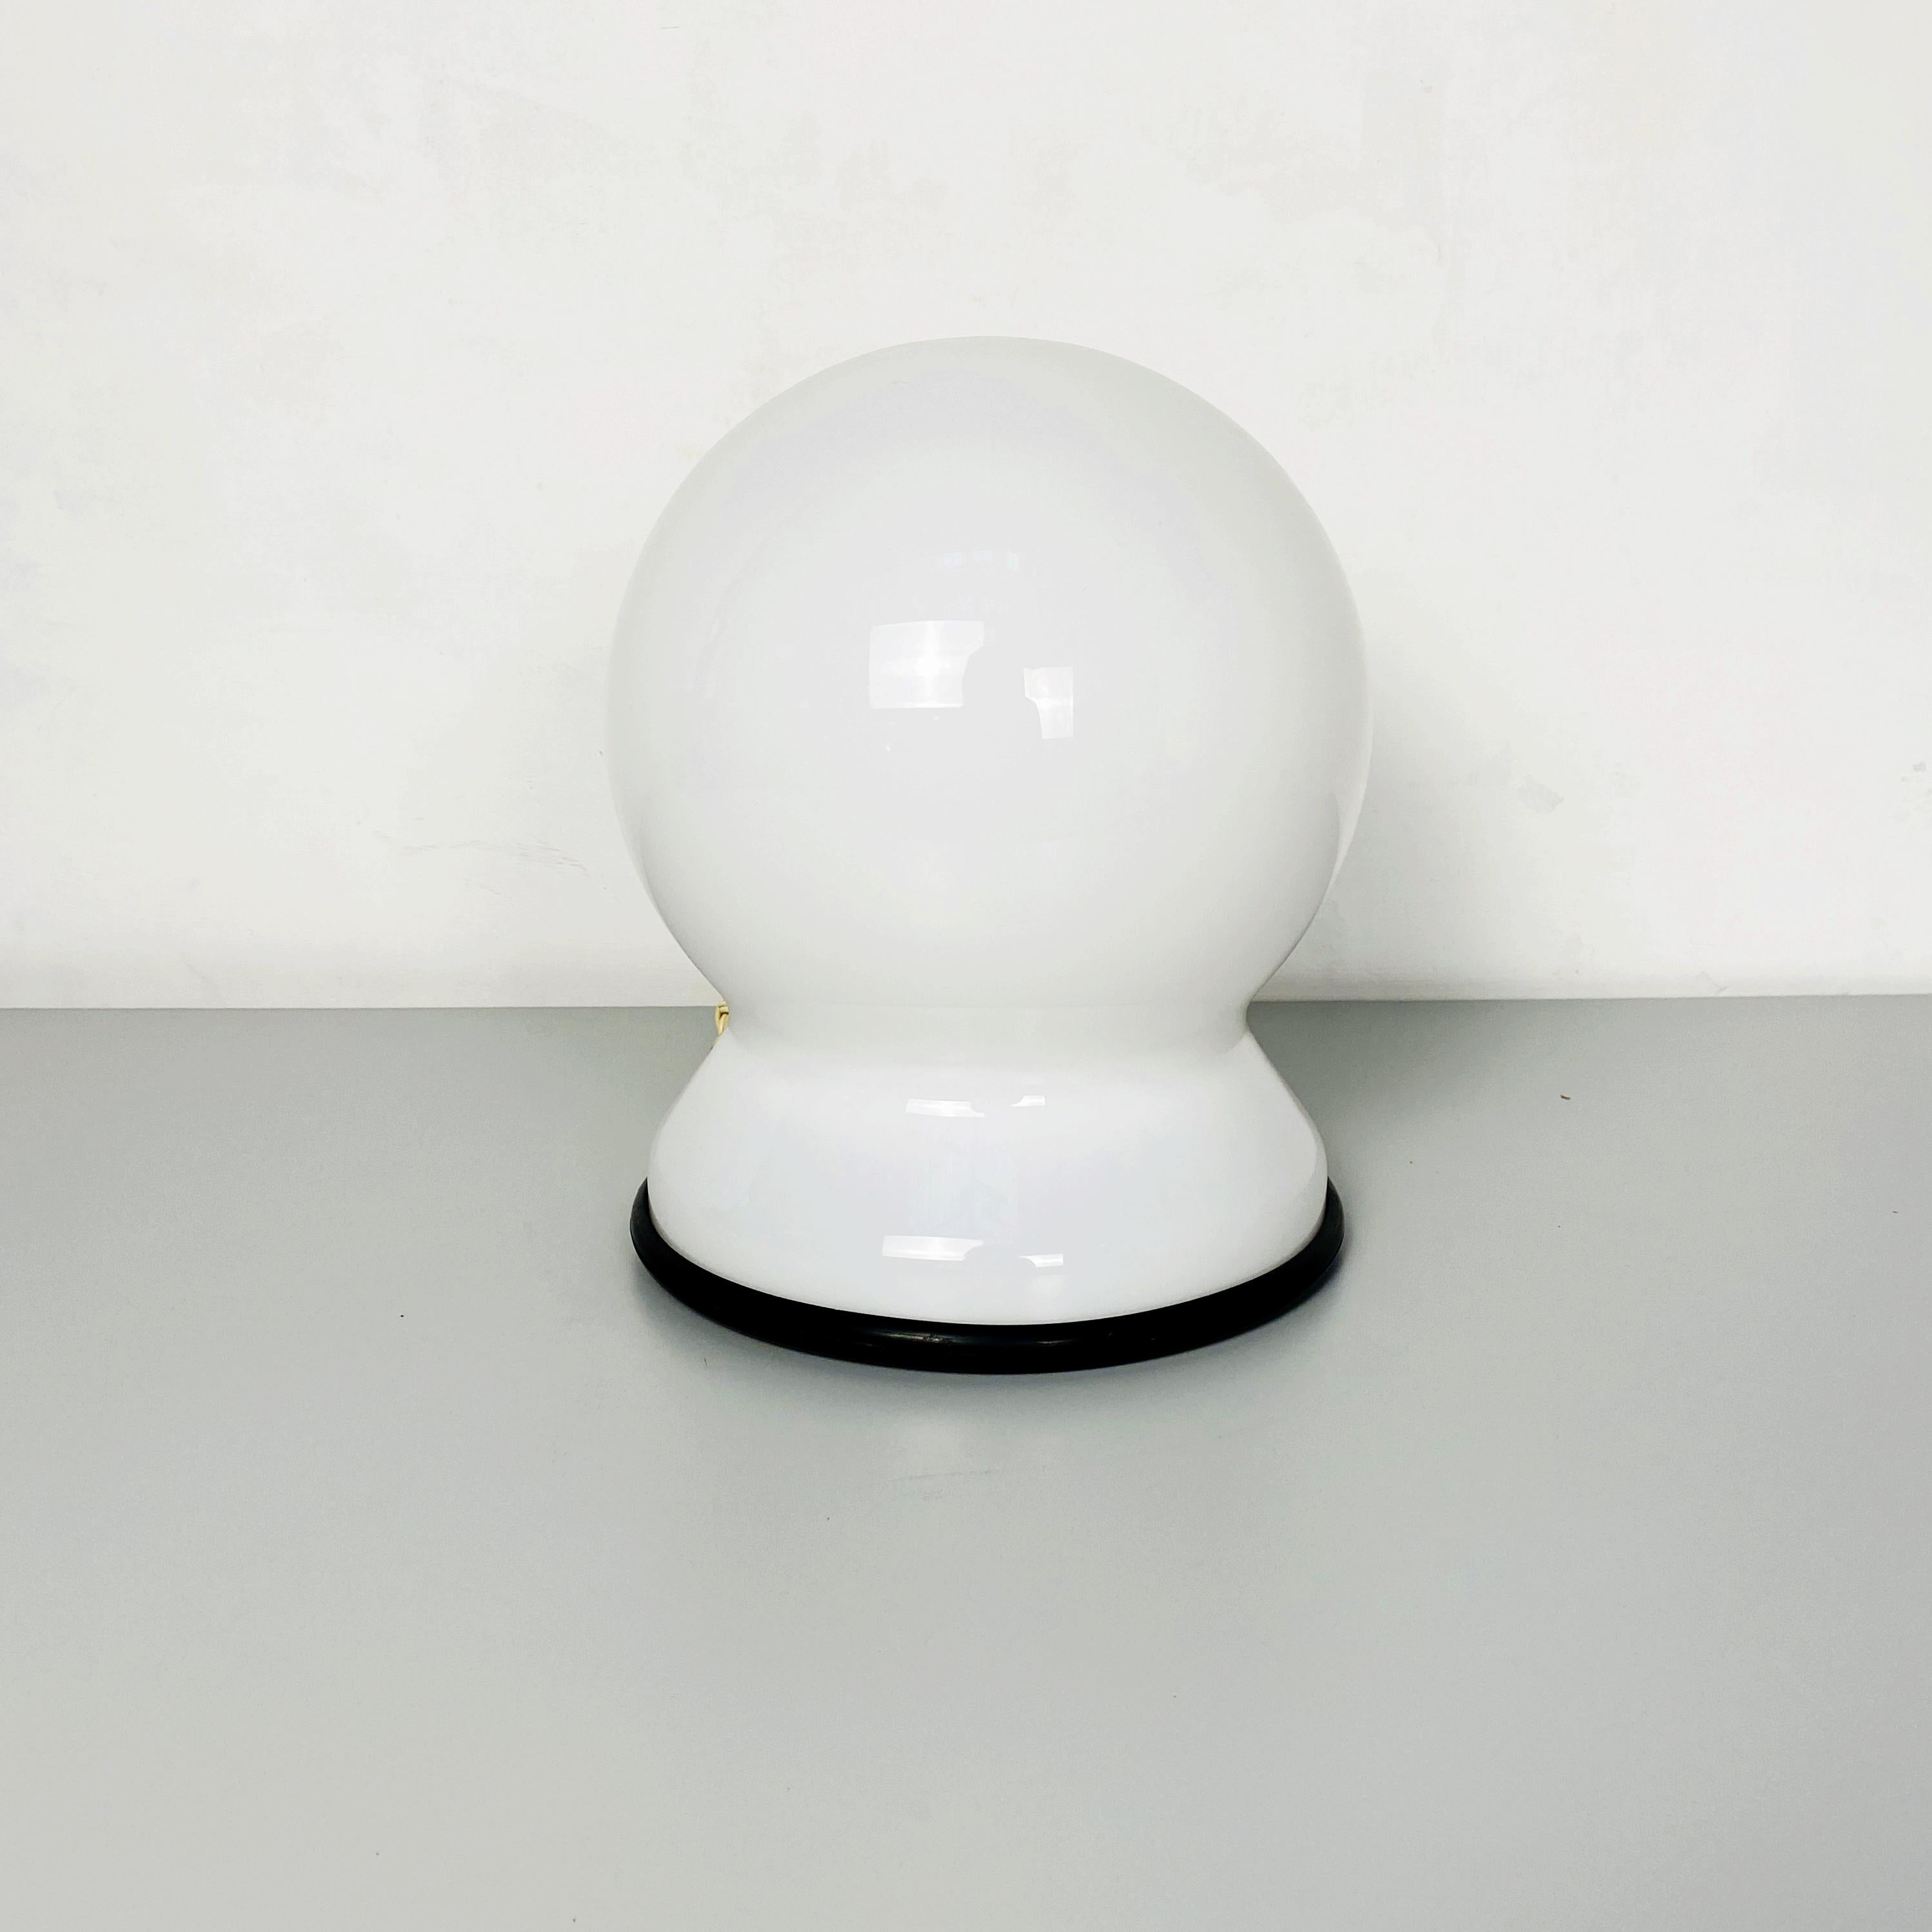 Italian glass table lamp Scafandro by Sergio Asti por Martinelli Luce, 1972
Glass table lamp Scafandro by Sergio Asti for Martinelli Luce, composed of a rubber base and white opal blown glass.

Good conditions

Measures: 26 x 37 H cm.

If you are